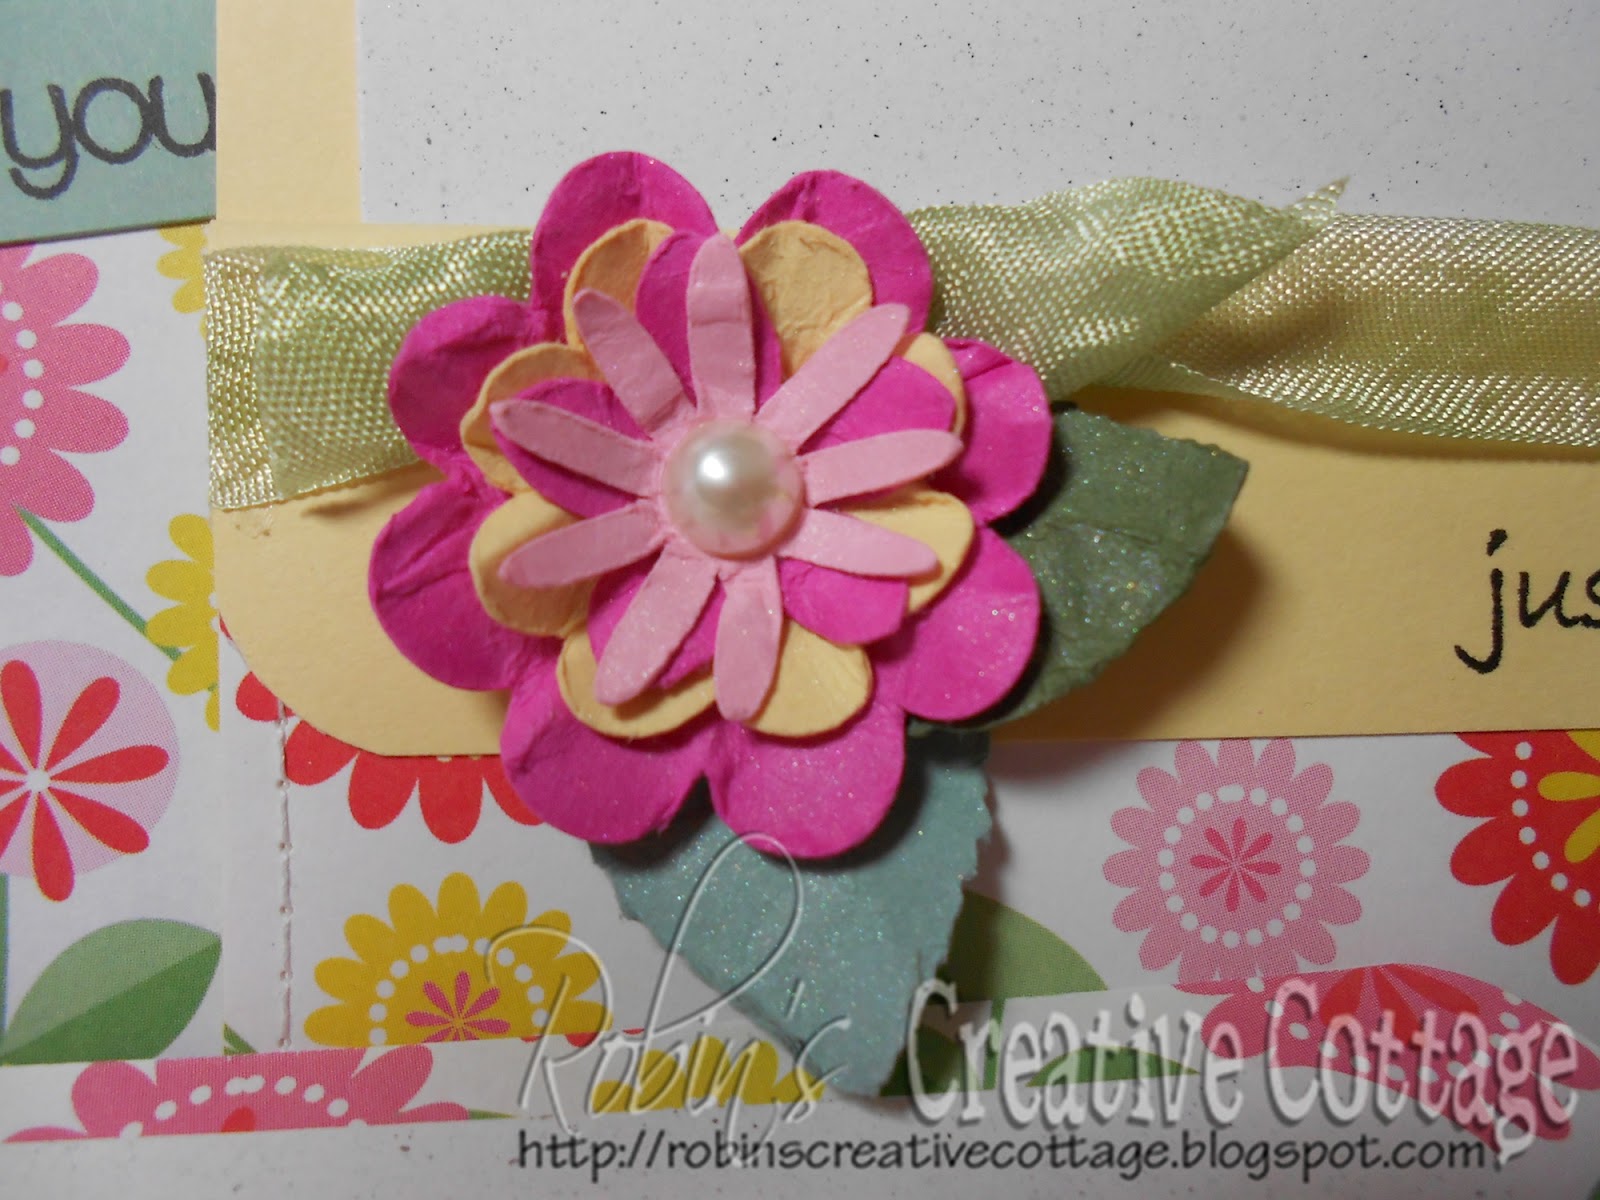 Robin's Creative Cottage: Pocket Card -My Craft Spot Challenge Project ...